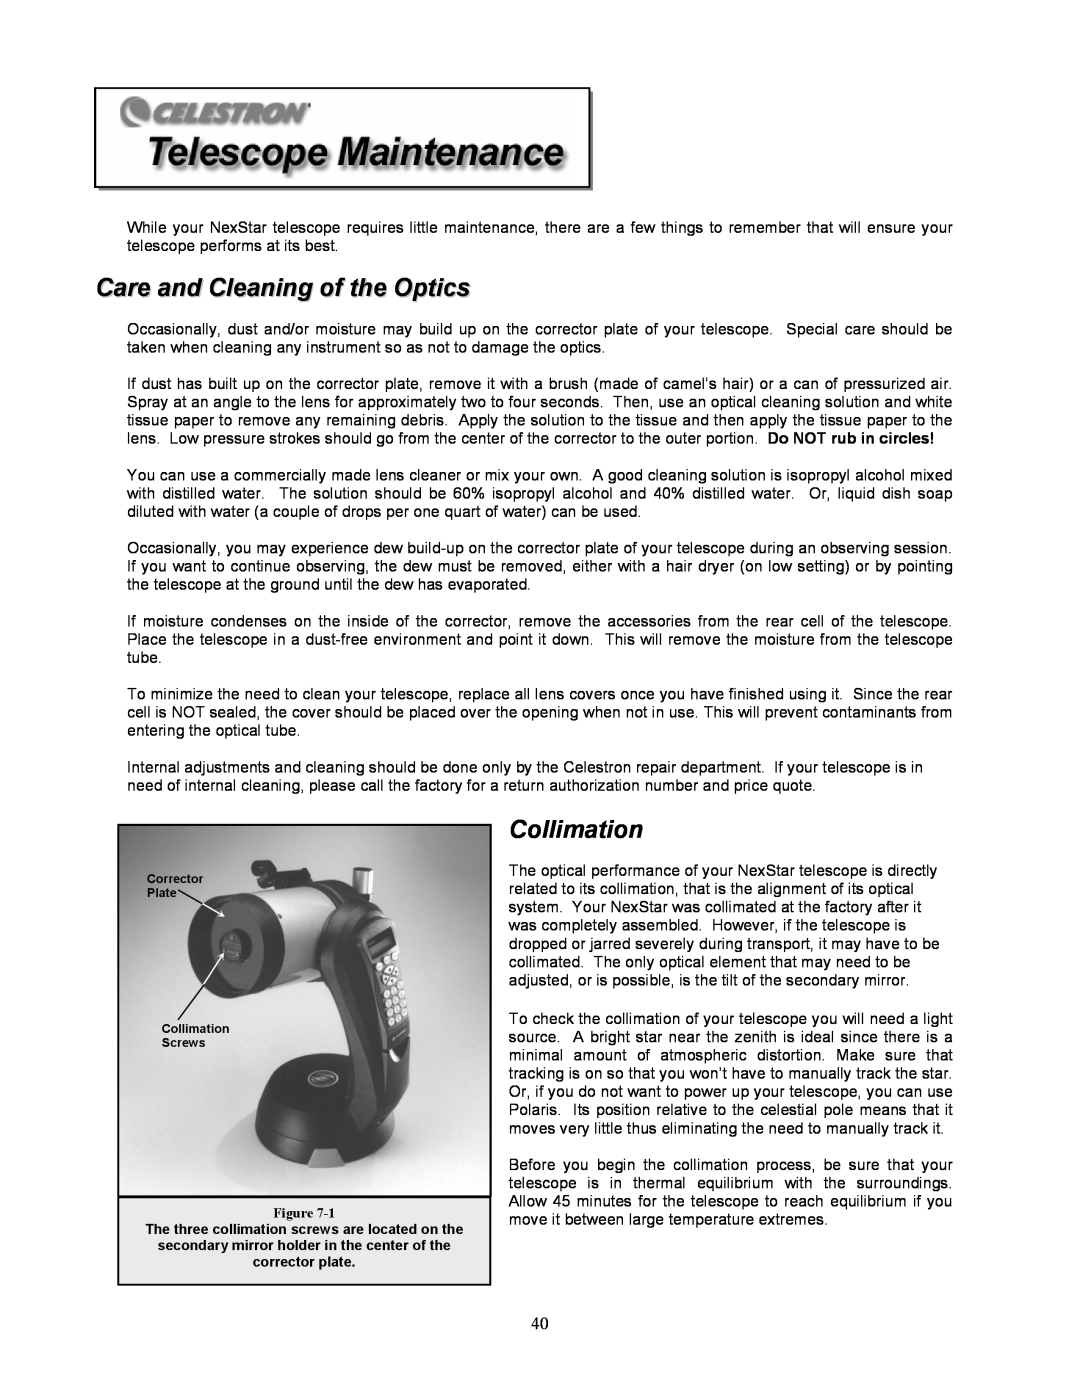 Celestron NexStar 8i manual Care and Cleaning of the Optics, Corrector Plate Collimation Screws 